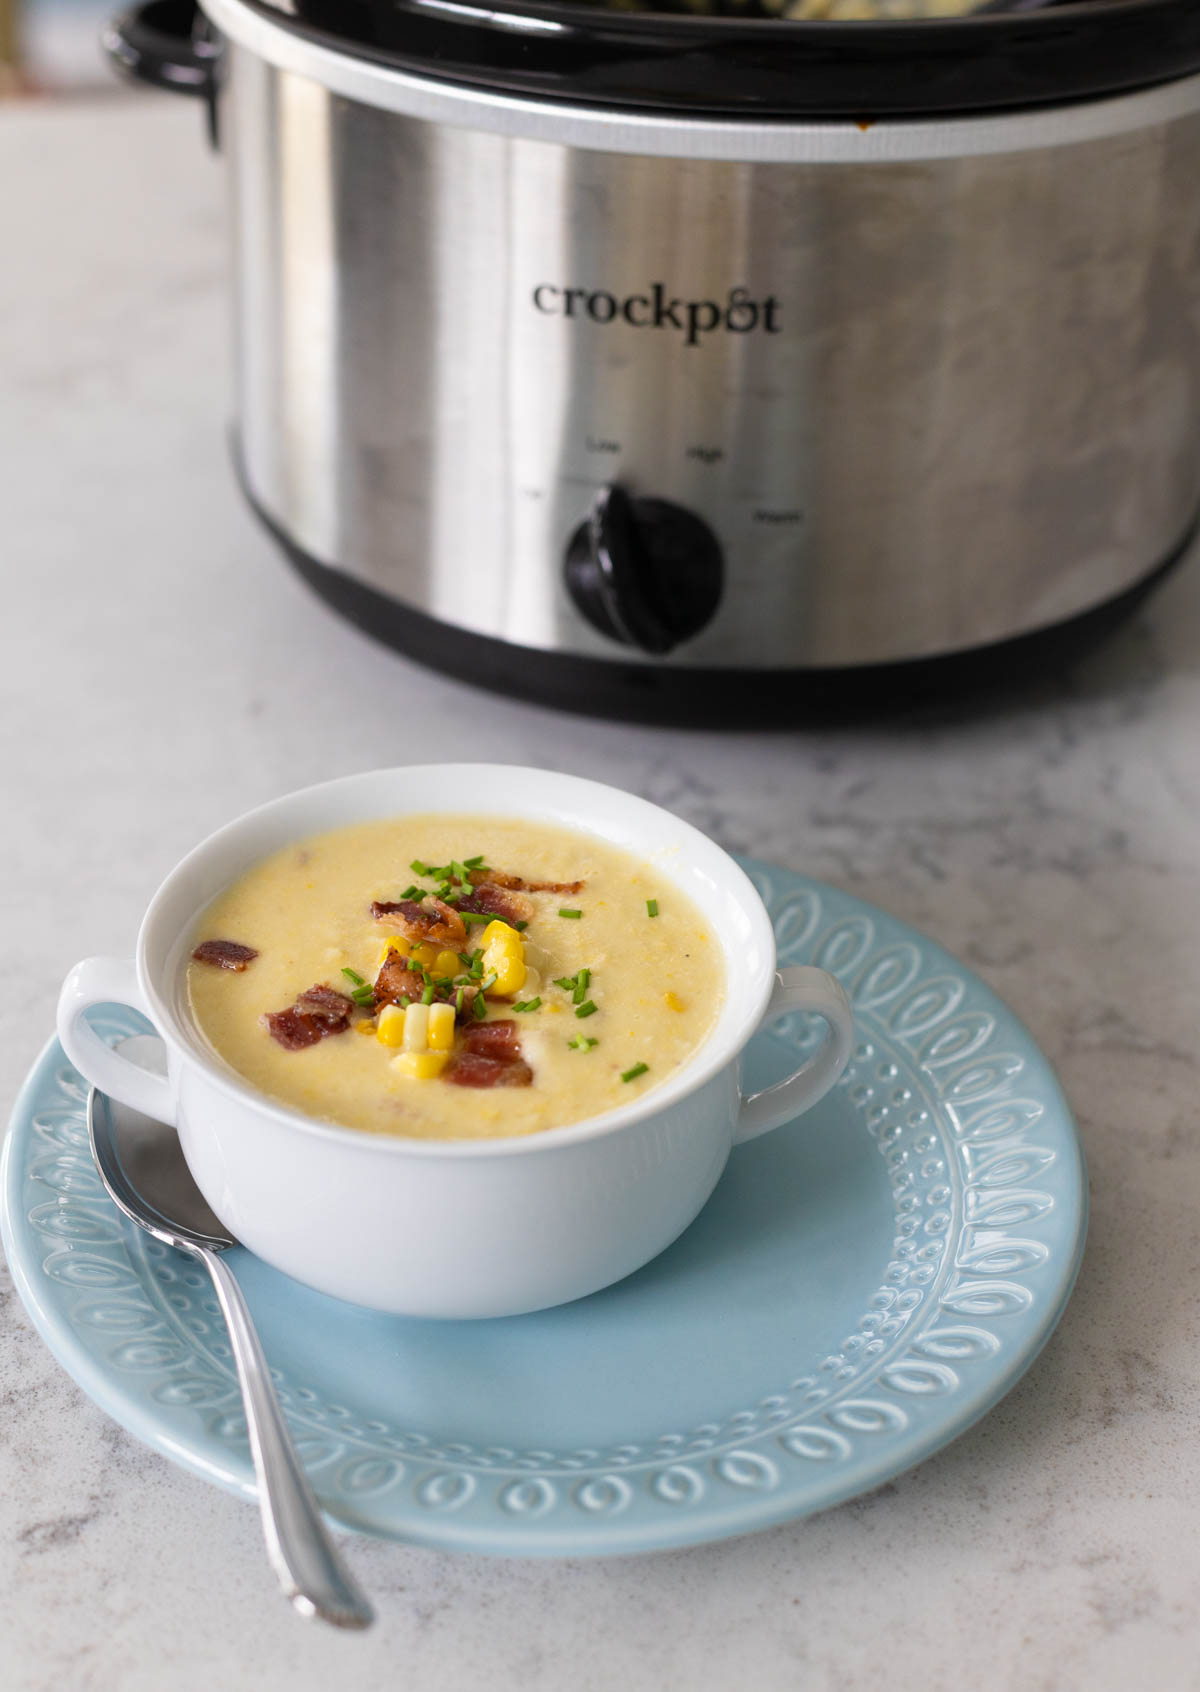 The serving of corn chowder is on the counter in front of the Crockpot